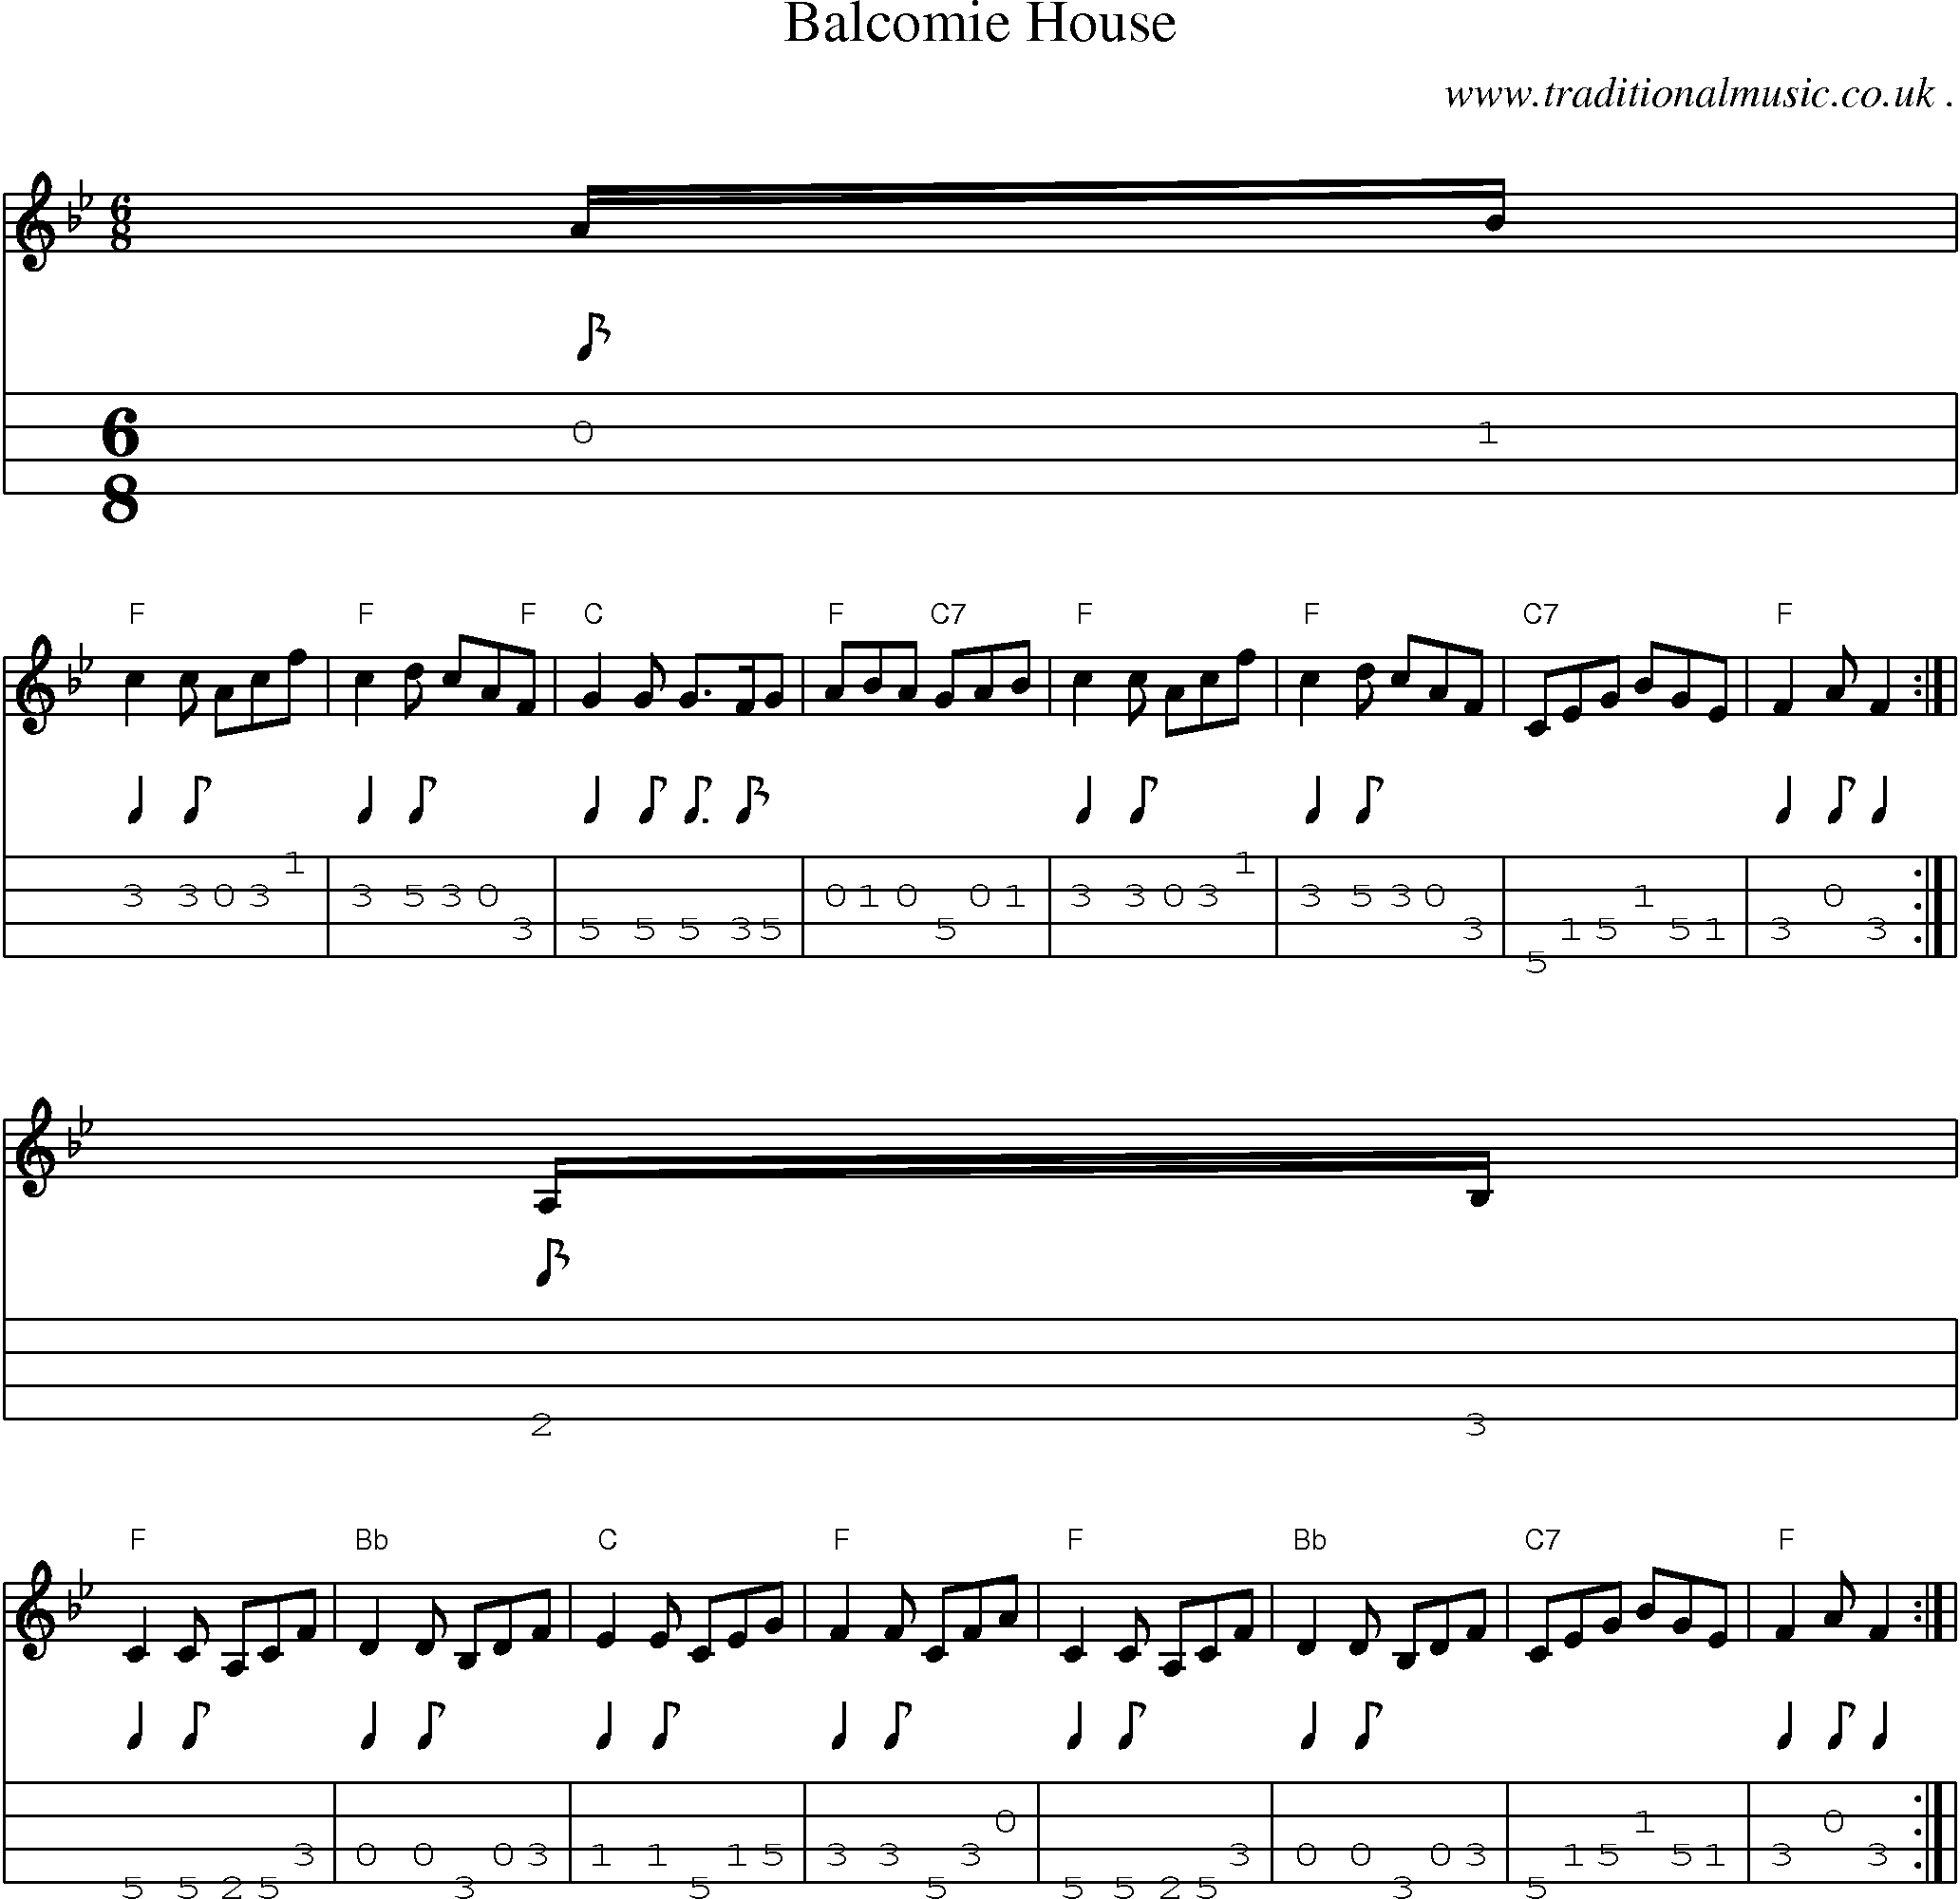 Sheet-music  score, Chords and Mandolin Tabs for Balcomie House